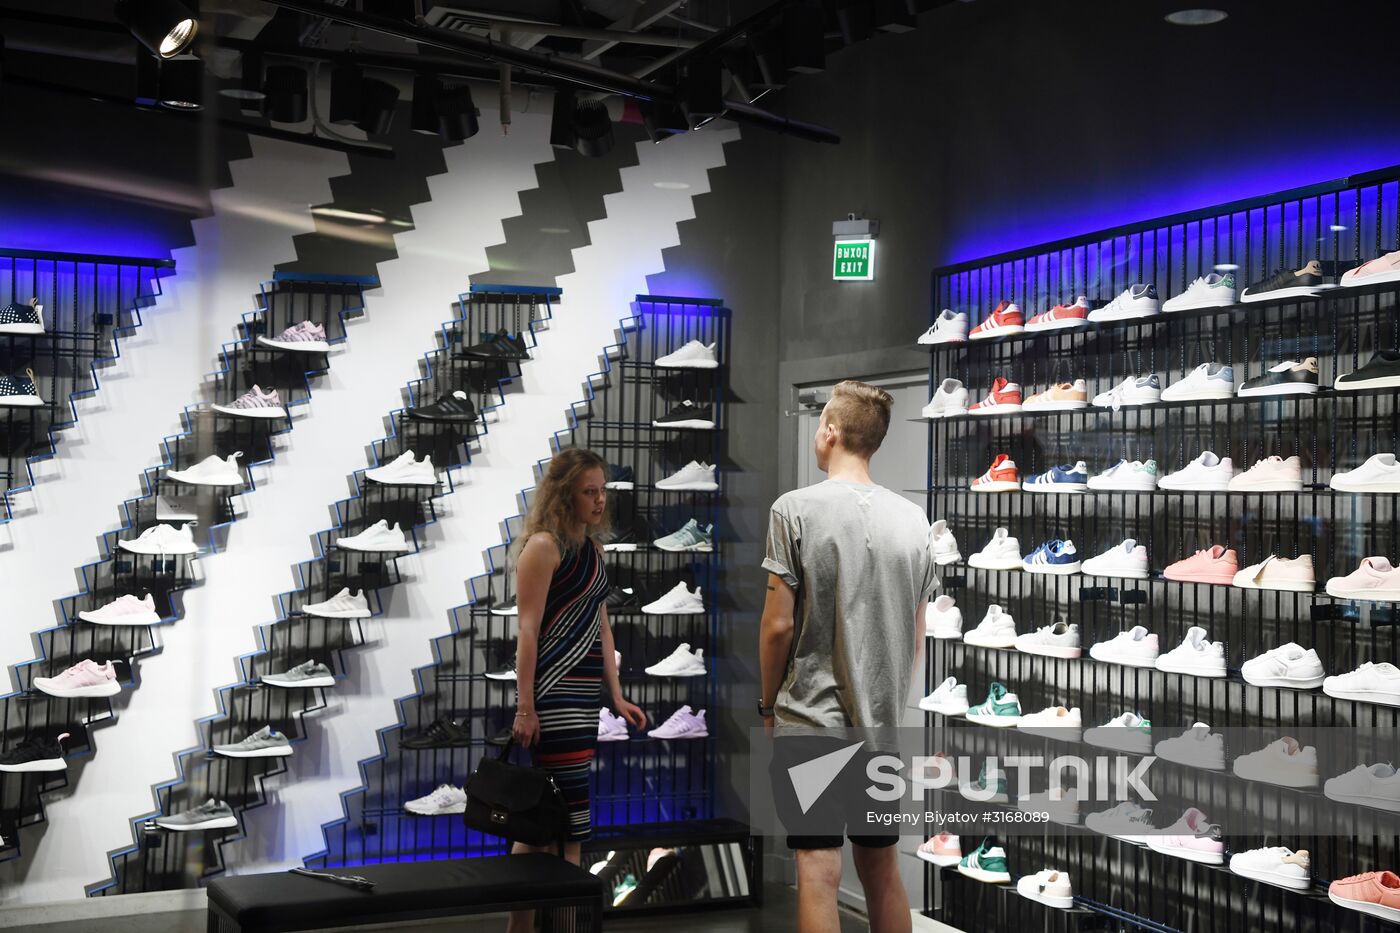 Adidas to close a number of stores in Russia this year